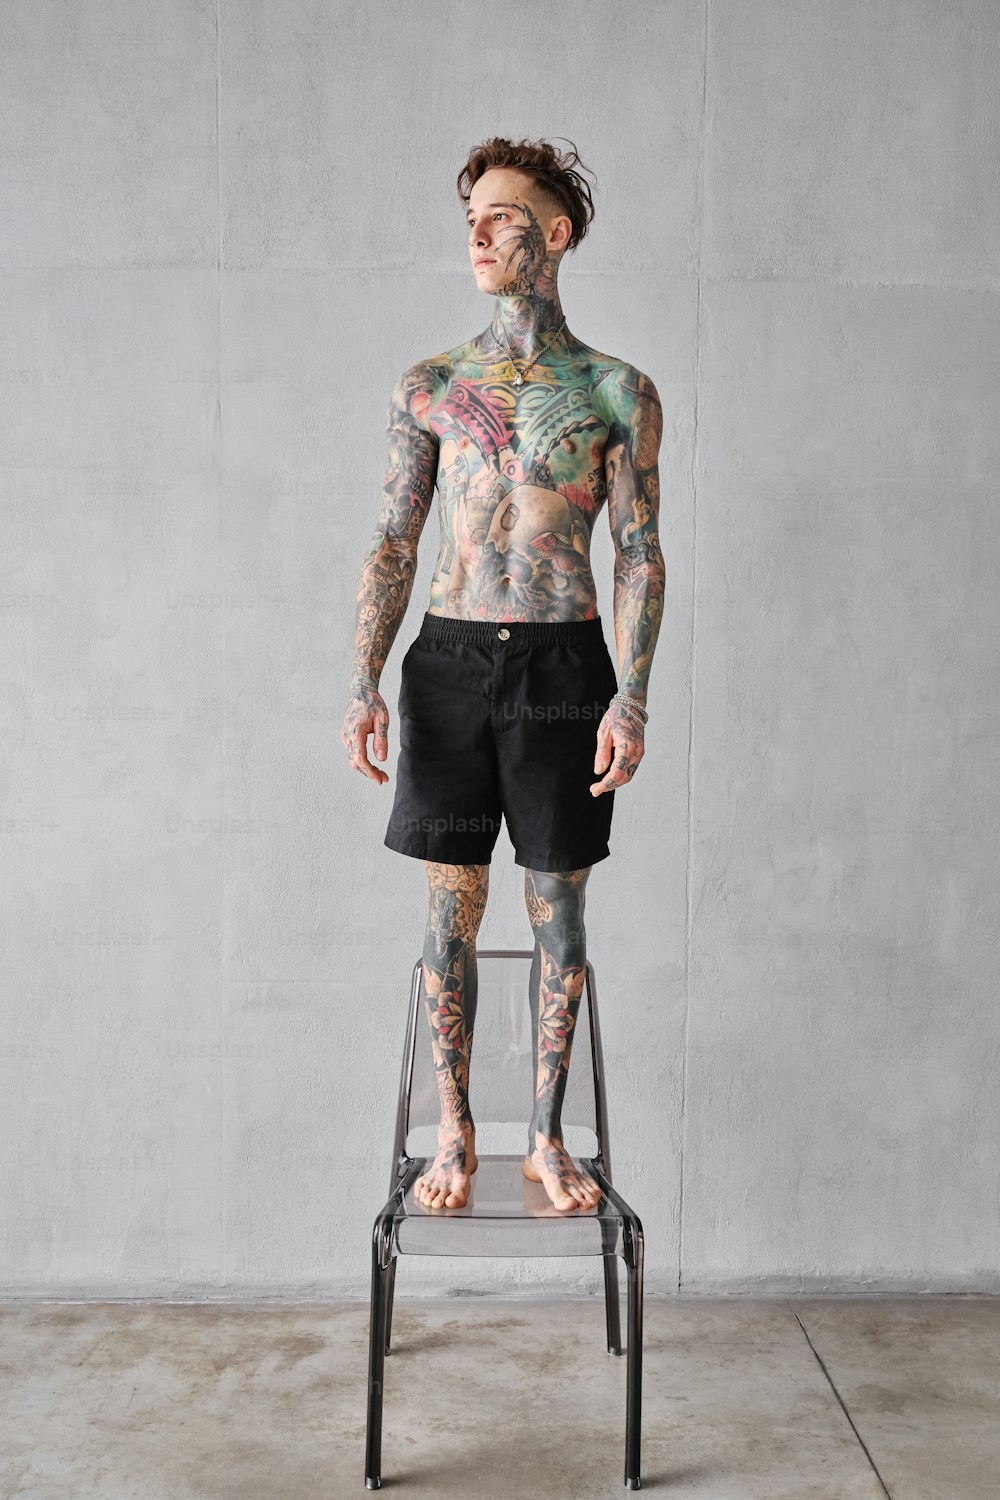 a man with tattoos standing on a chair